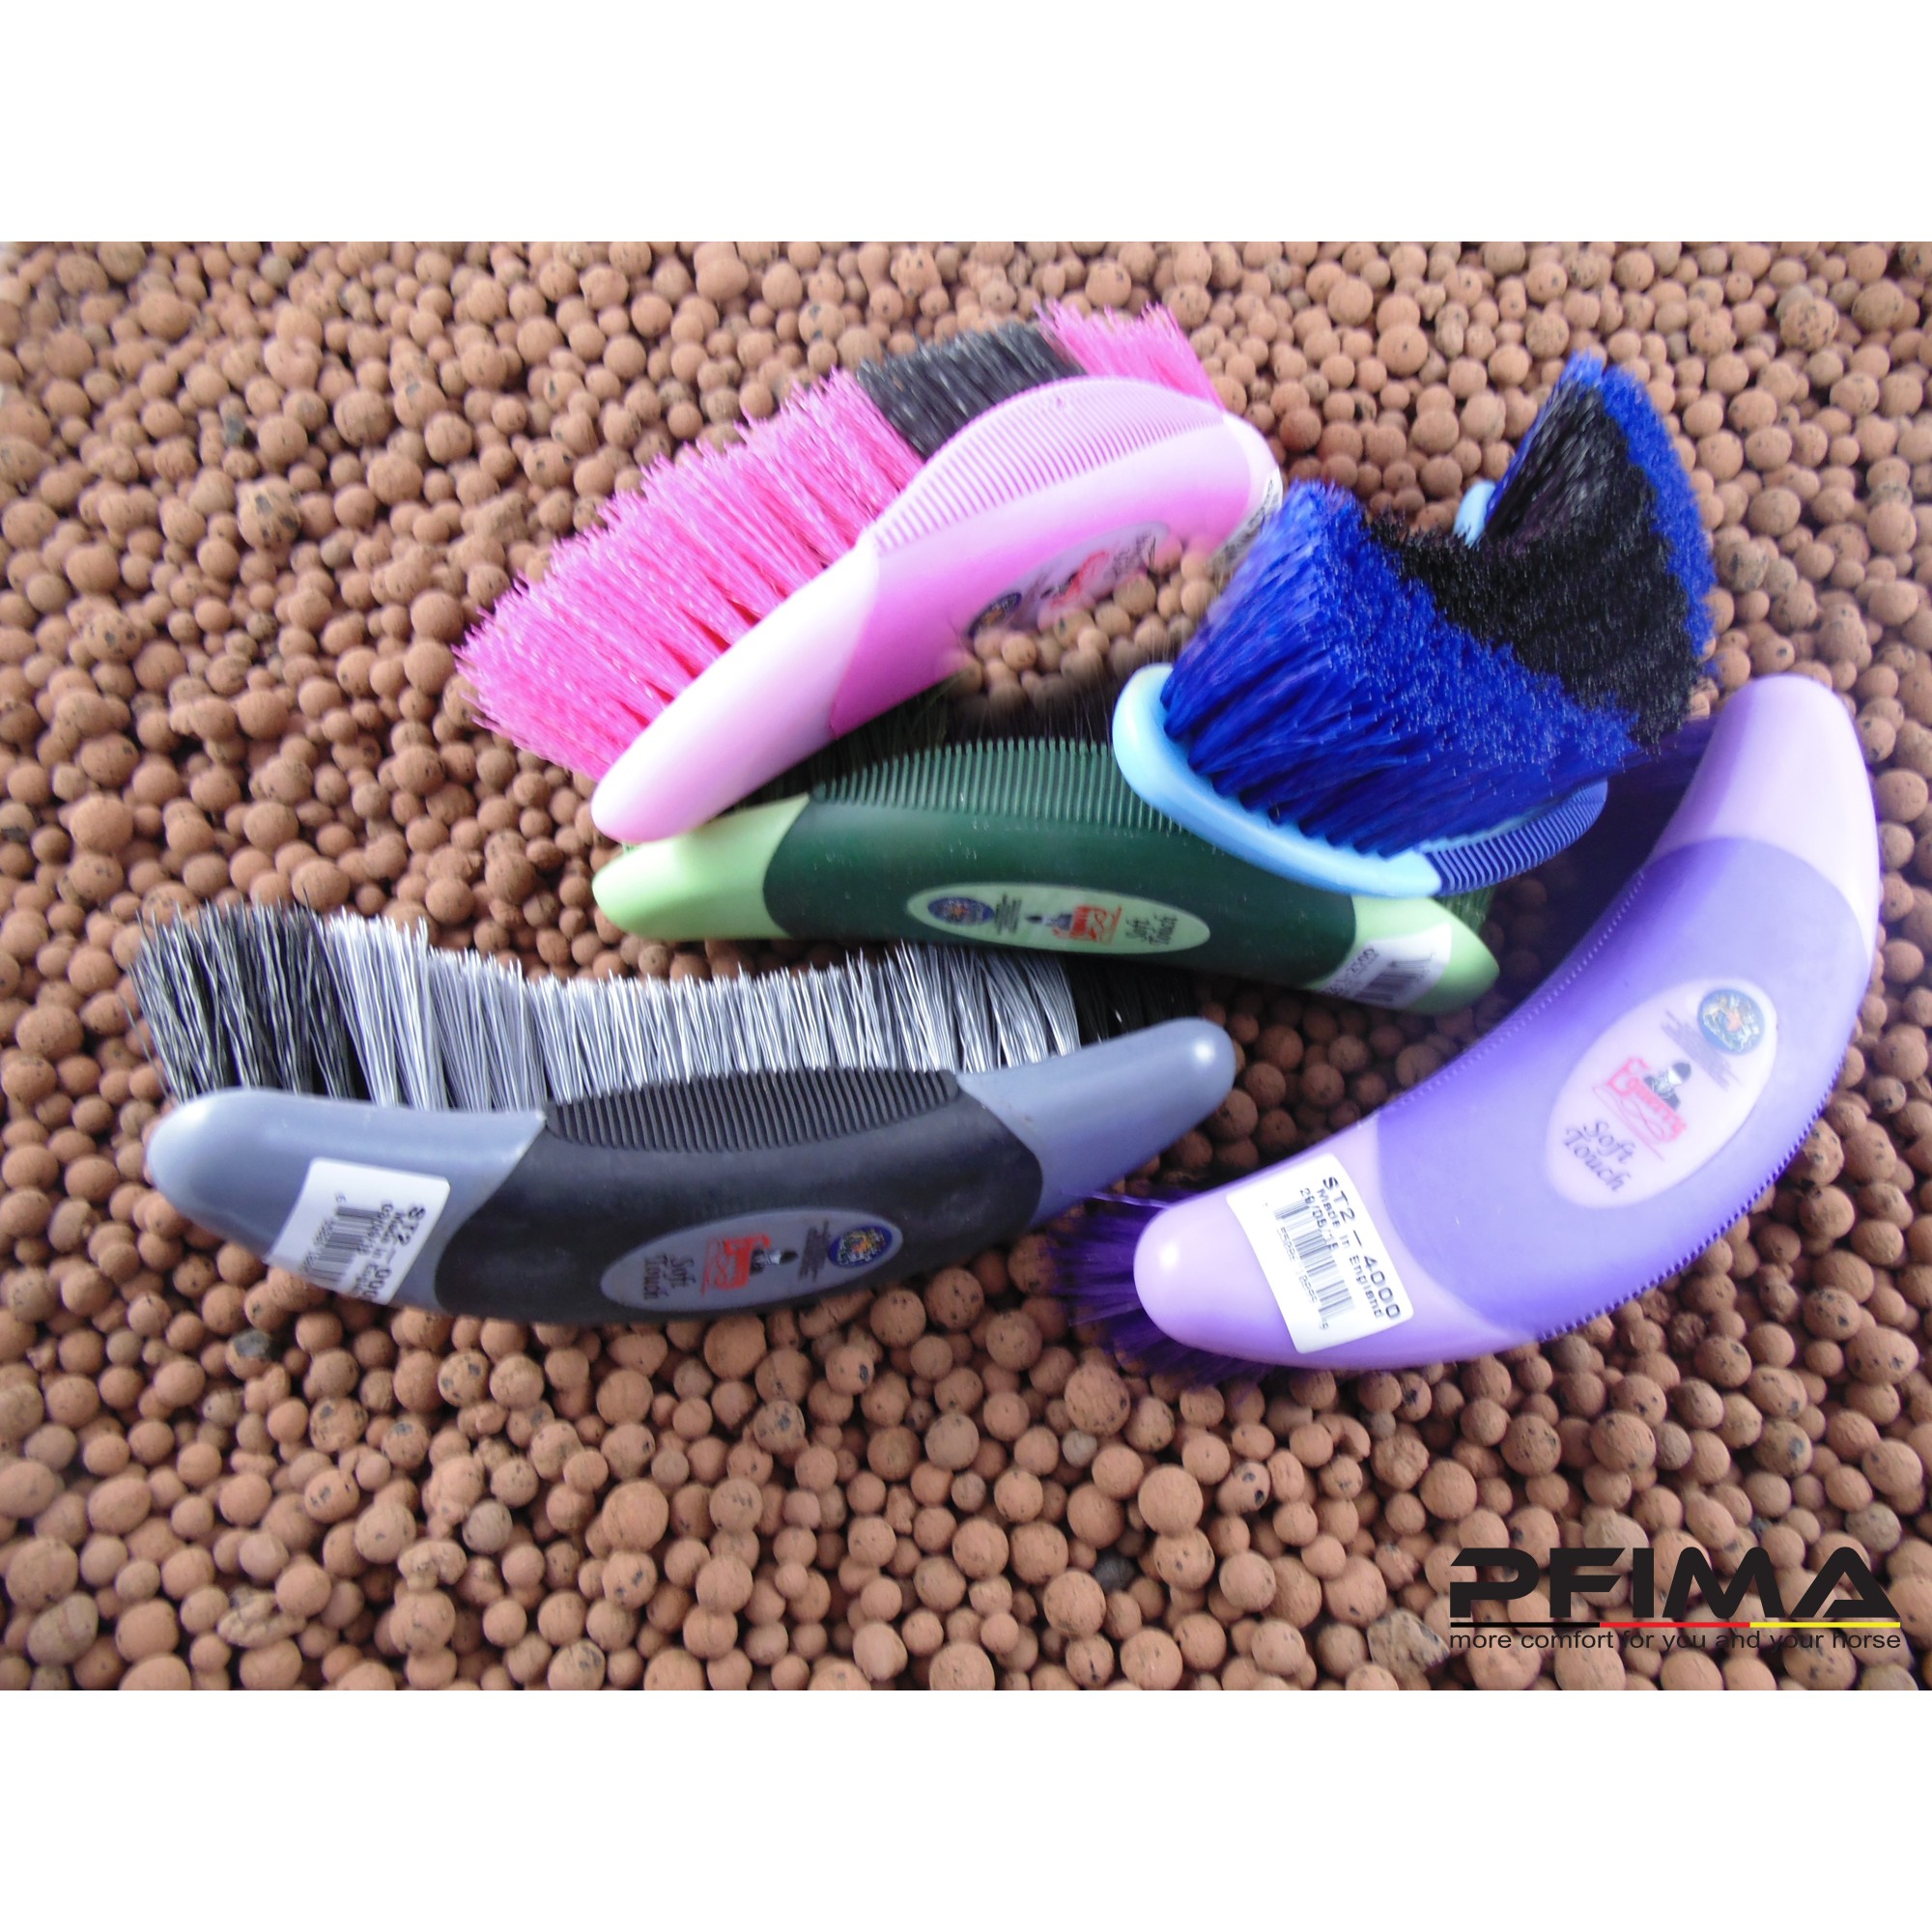 Soft Touch boomerang brush size S, blue